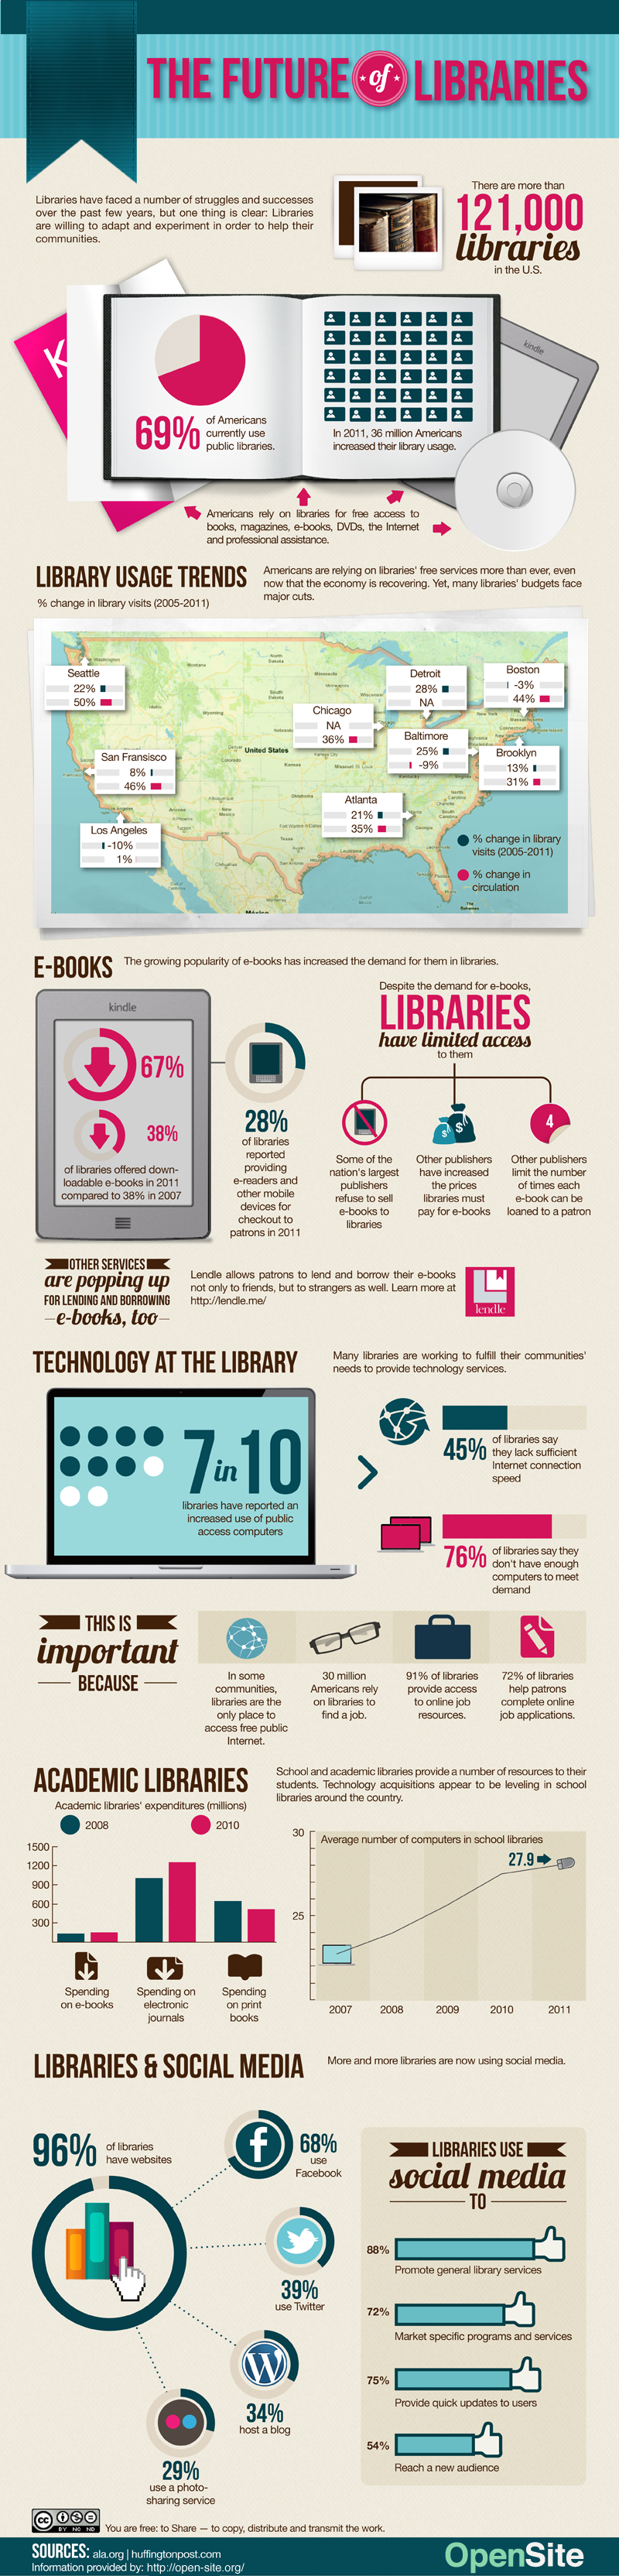 Trends of Public Libraries and Future Needs